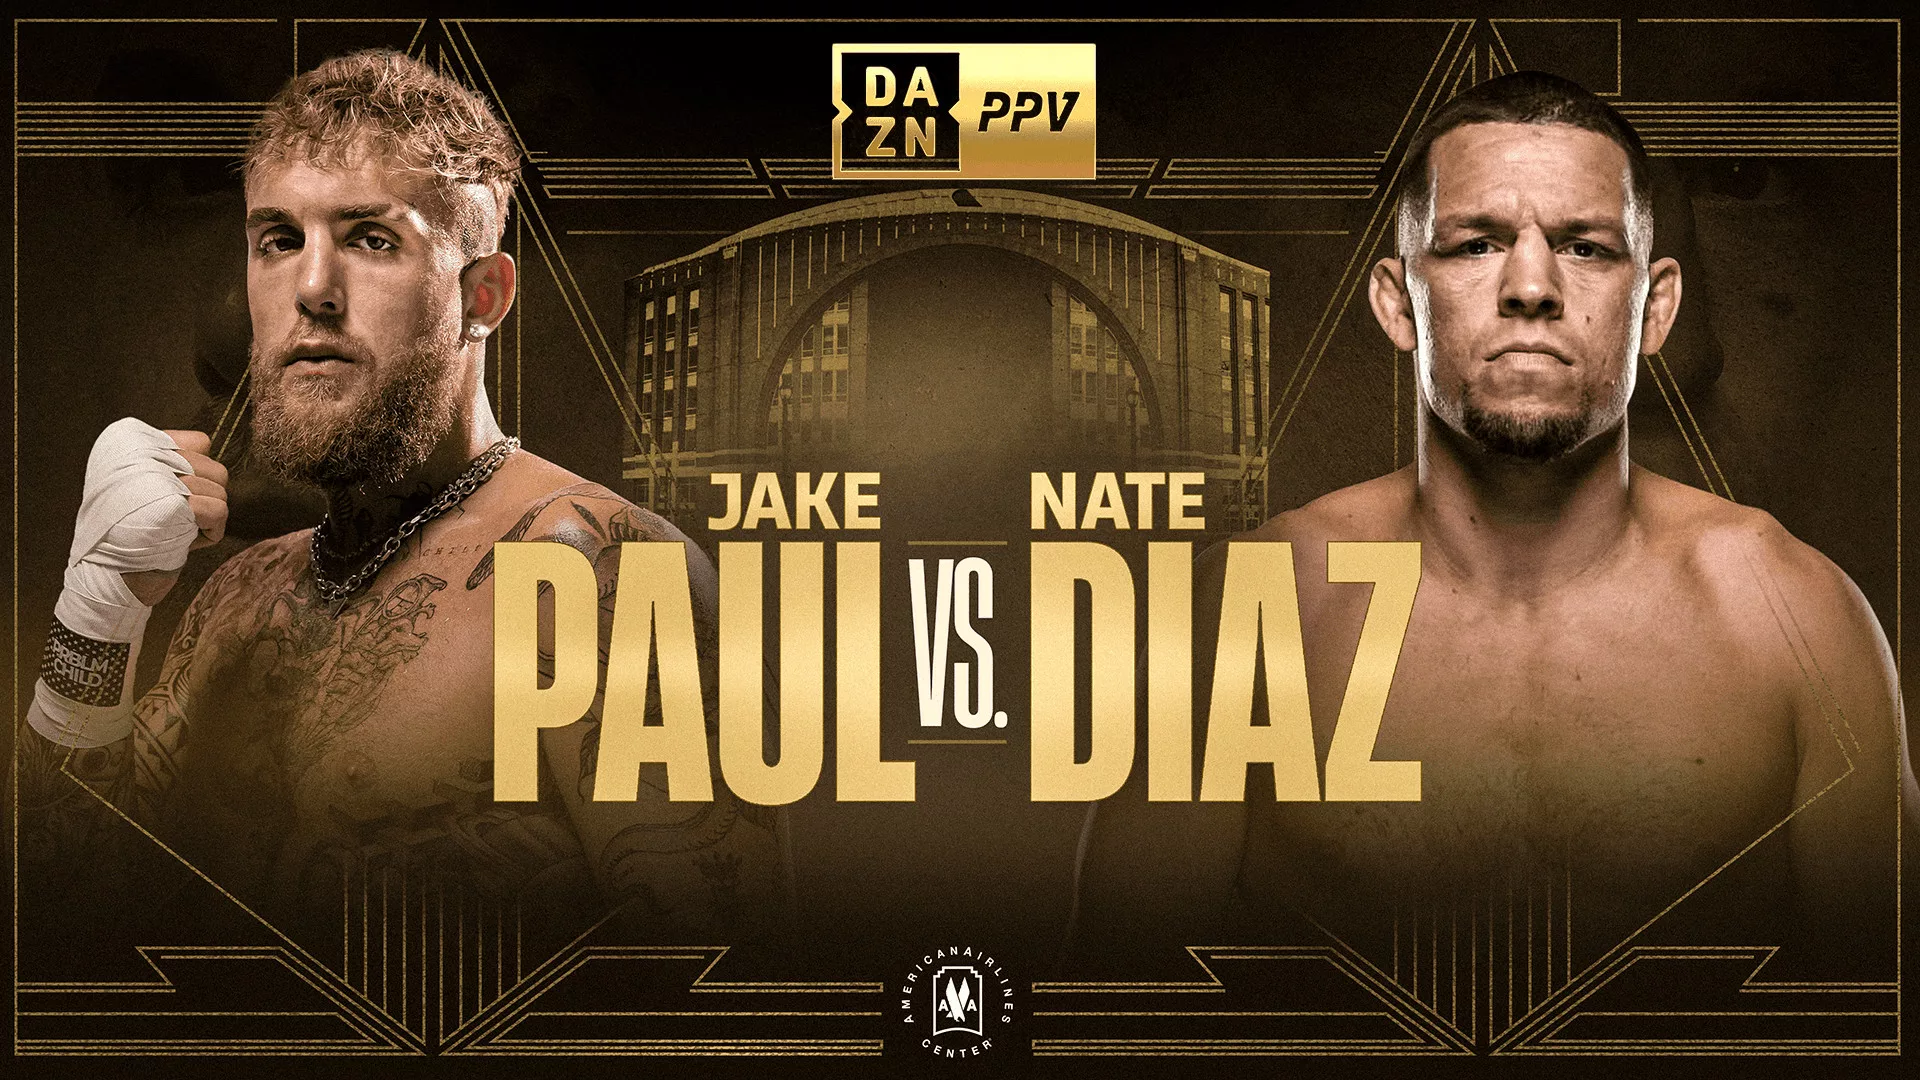 Nate Diaz vs Jake Paul Press Conference Announced for May 9th in Dallas, Tx